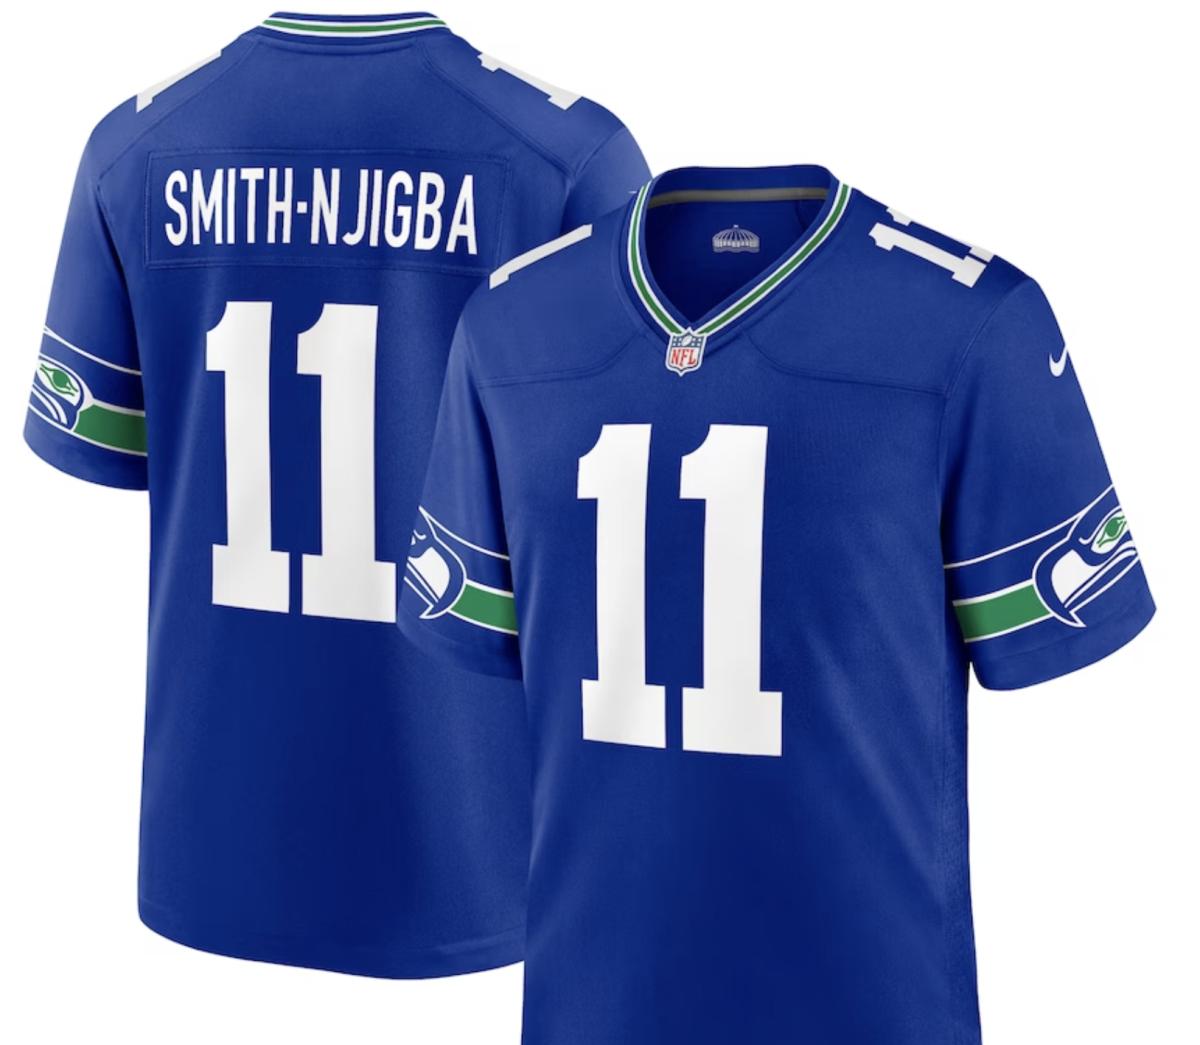 Seattle Seahawks Alternate Jersey, How to Buy Your Seahawks